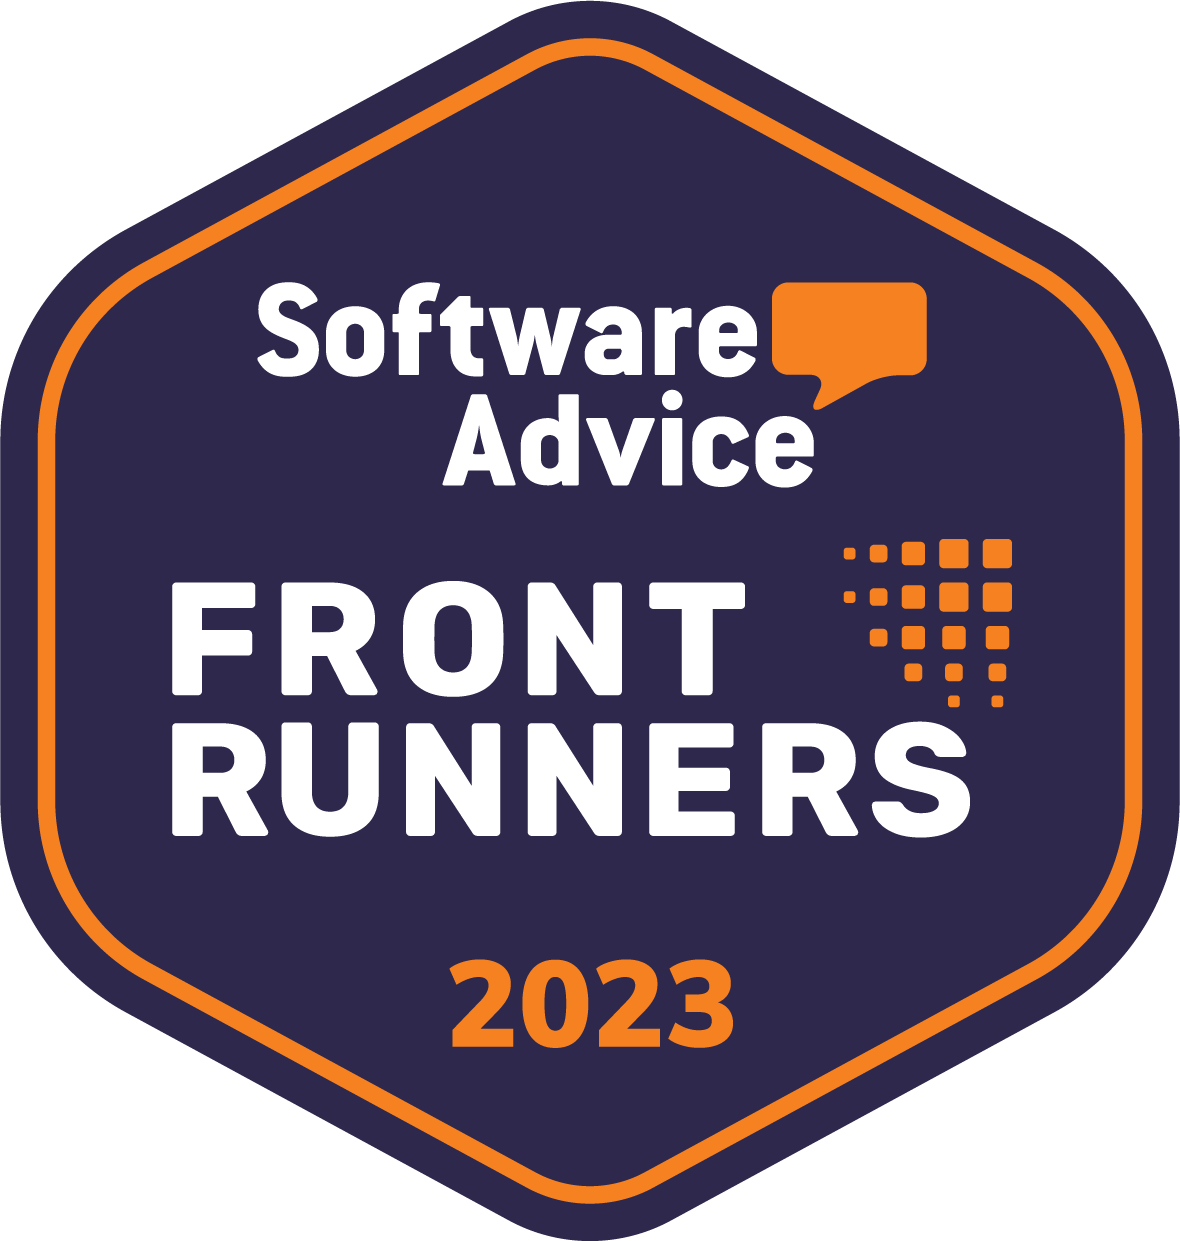 Software Frontrunners Report 202